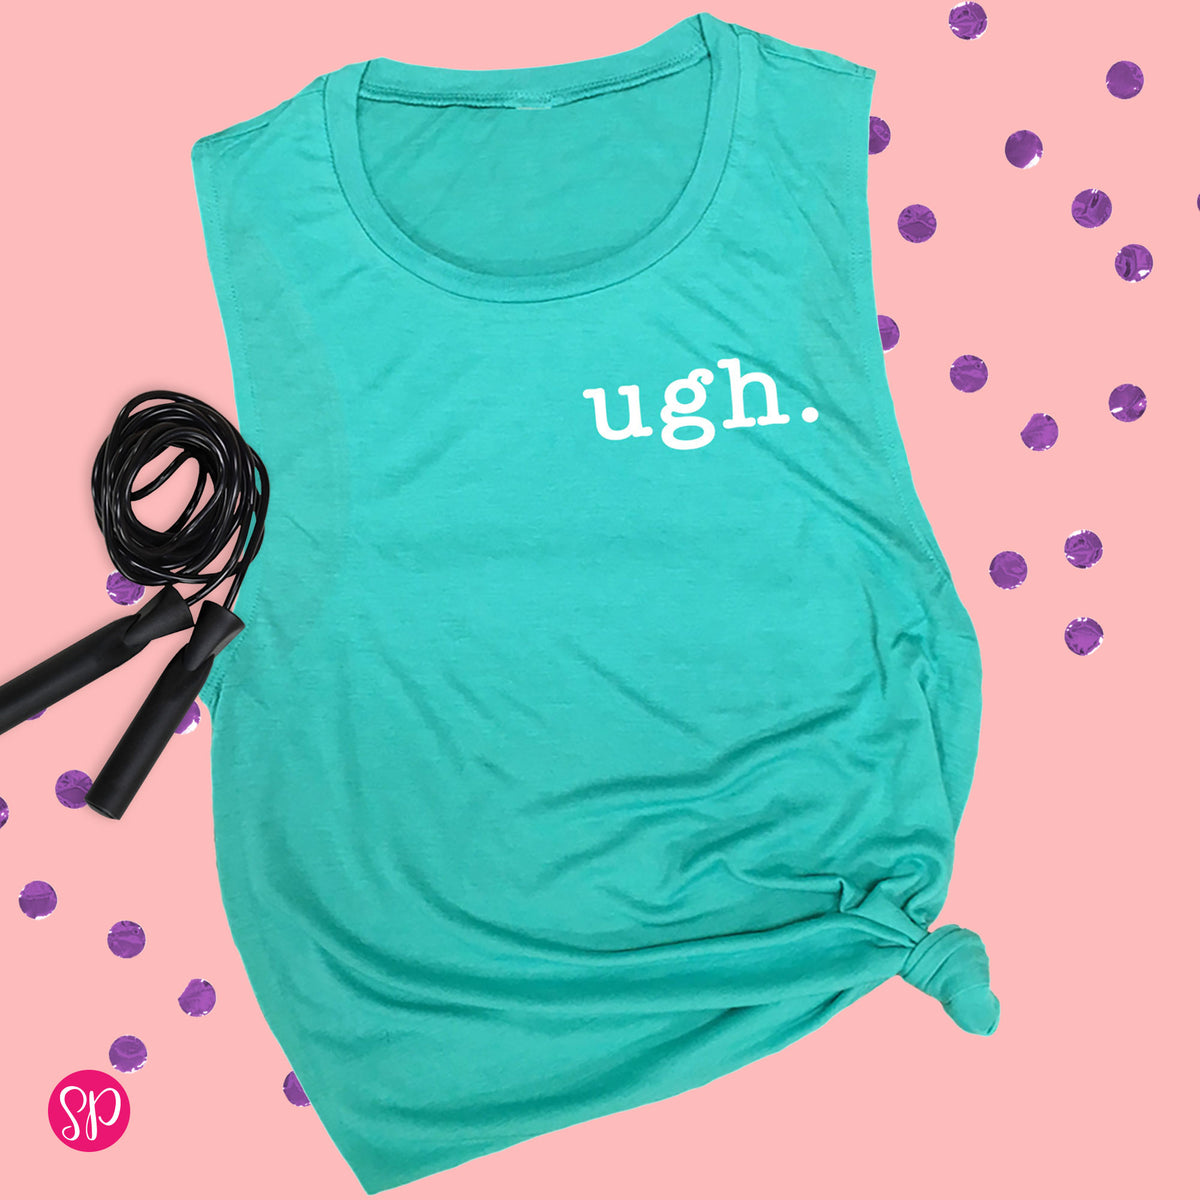 Ugh Funny Sarcastic Workout Fitness Graphic Muscle Tank Tee Shirt